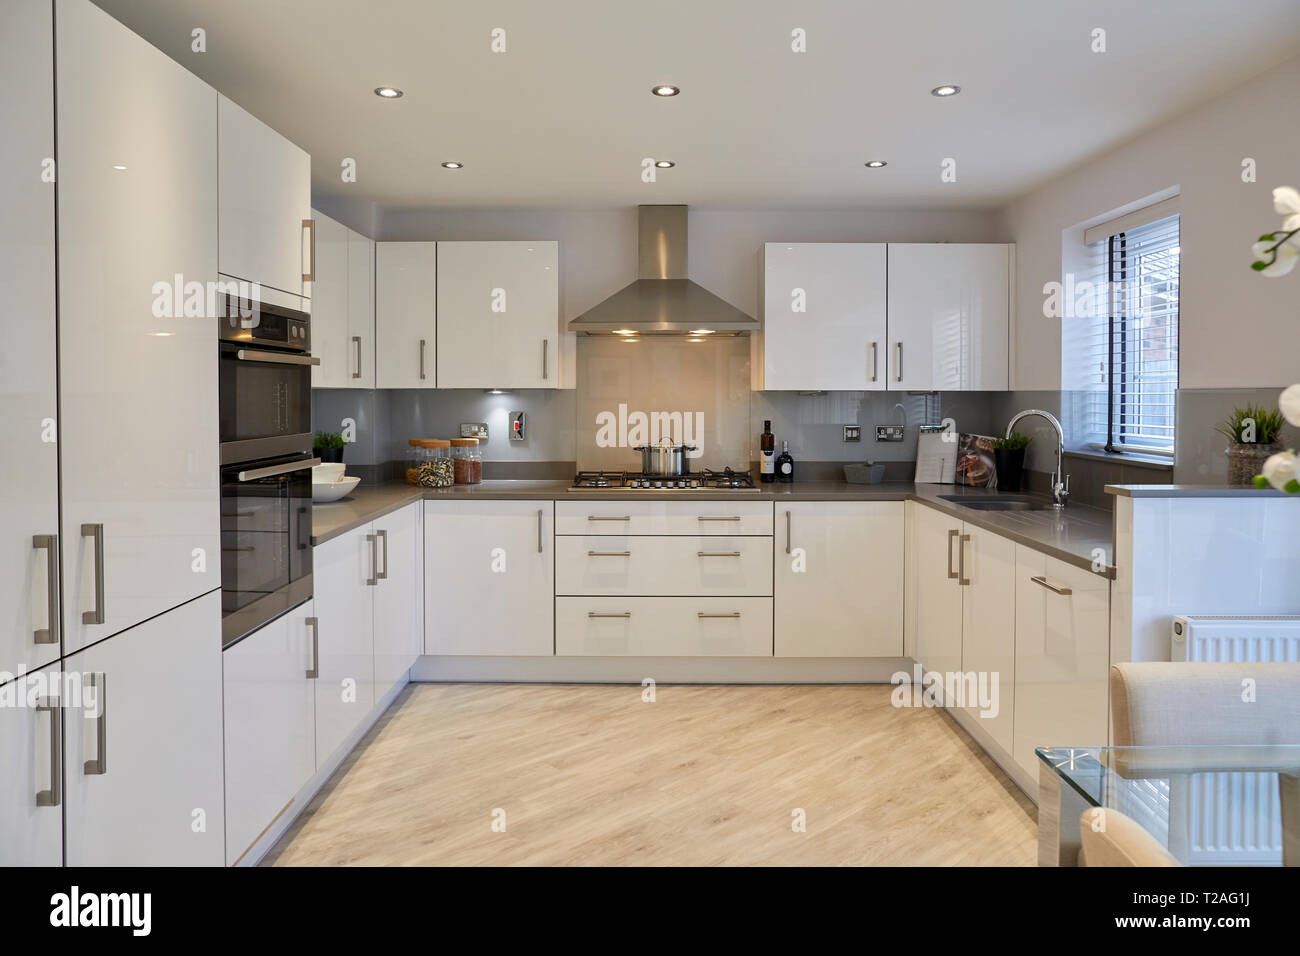 Stapeley Gardens in Nantwich, Cheshire Kitchen to modern new build house Stock Photo